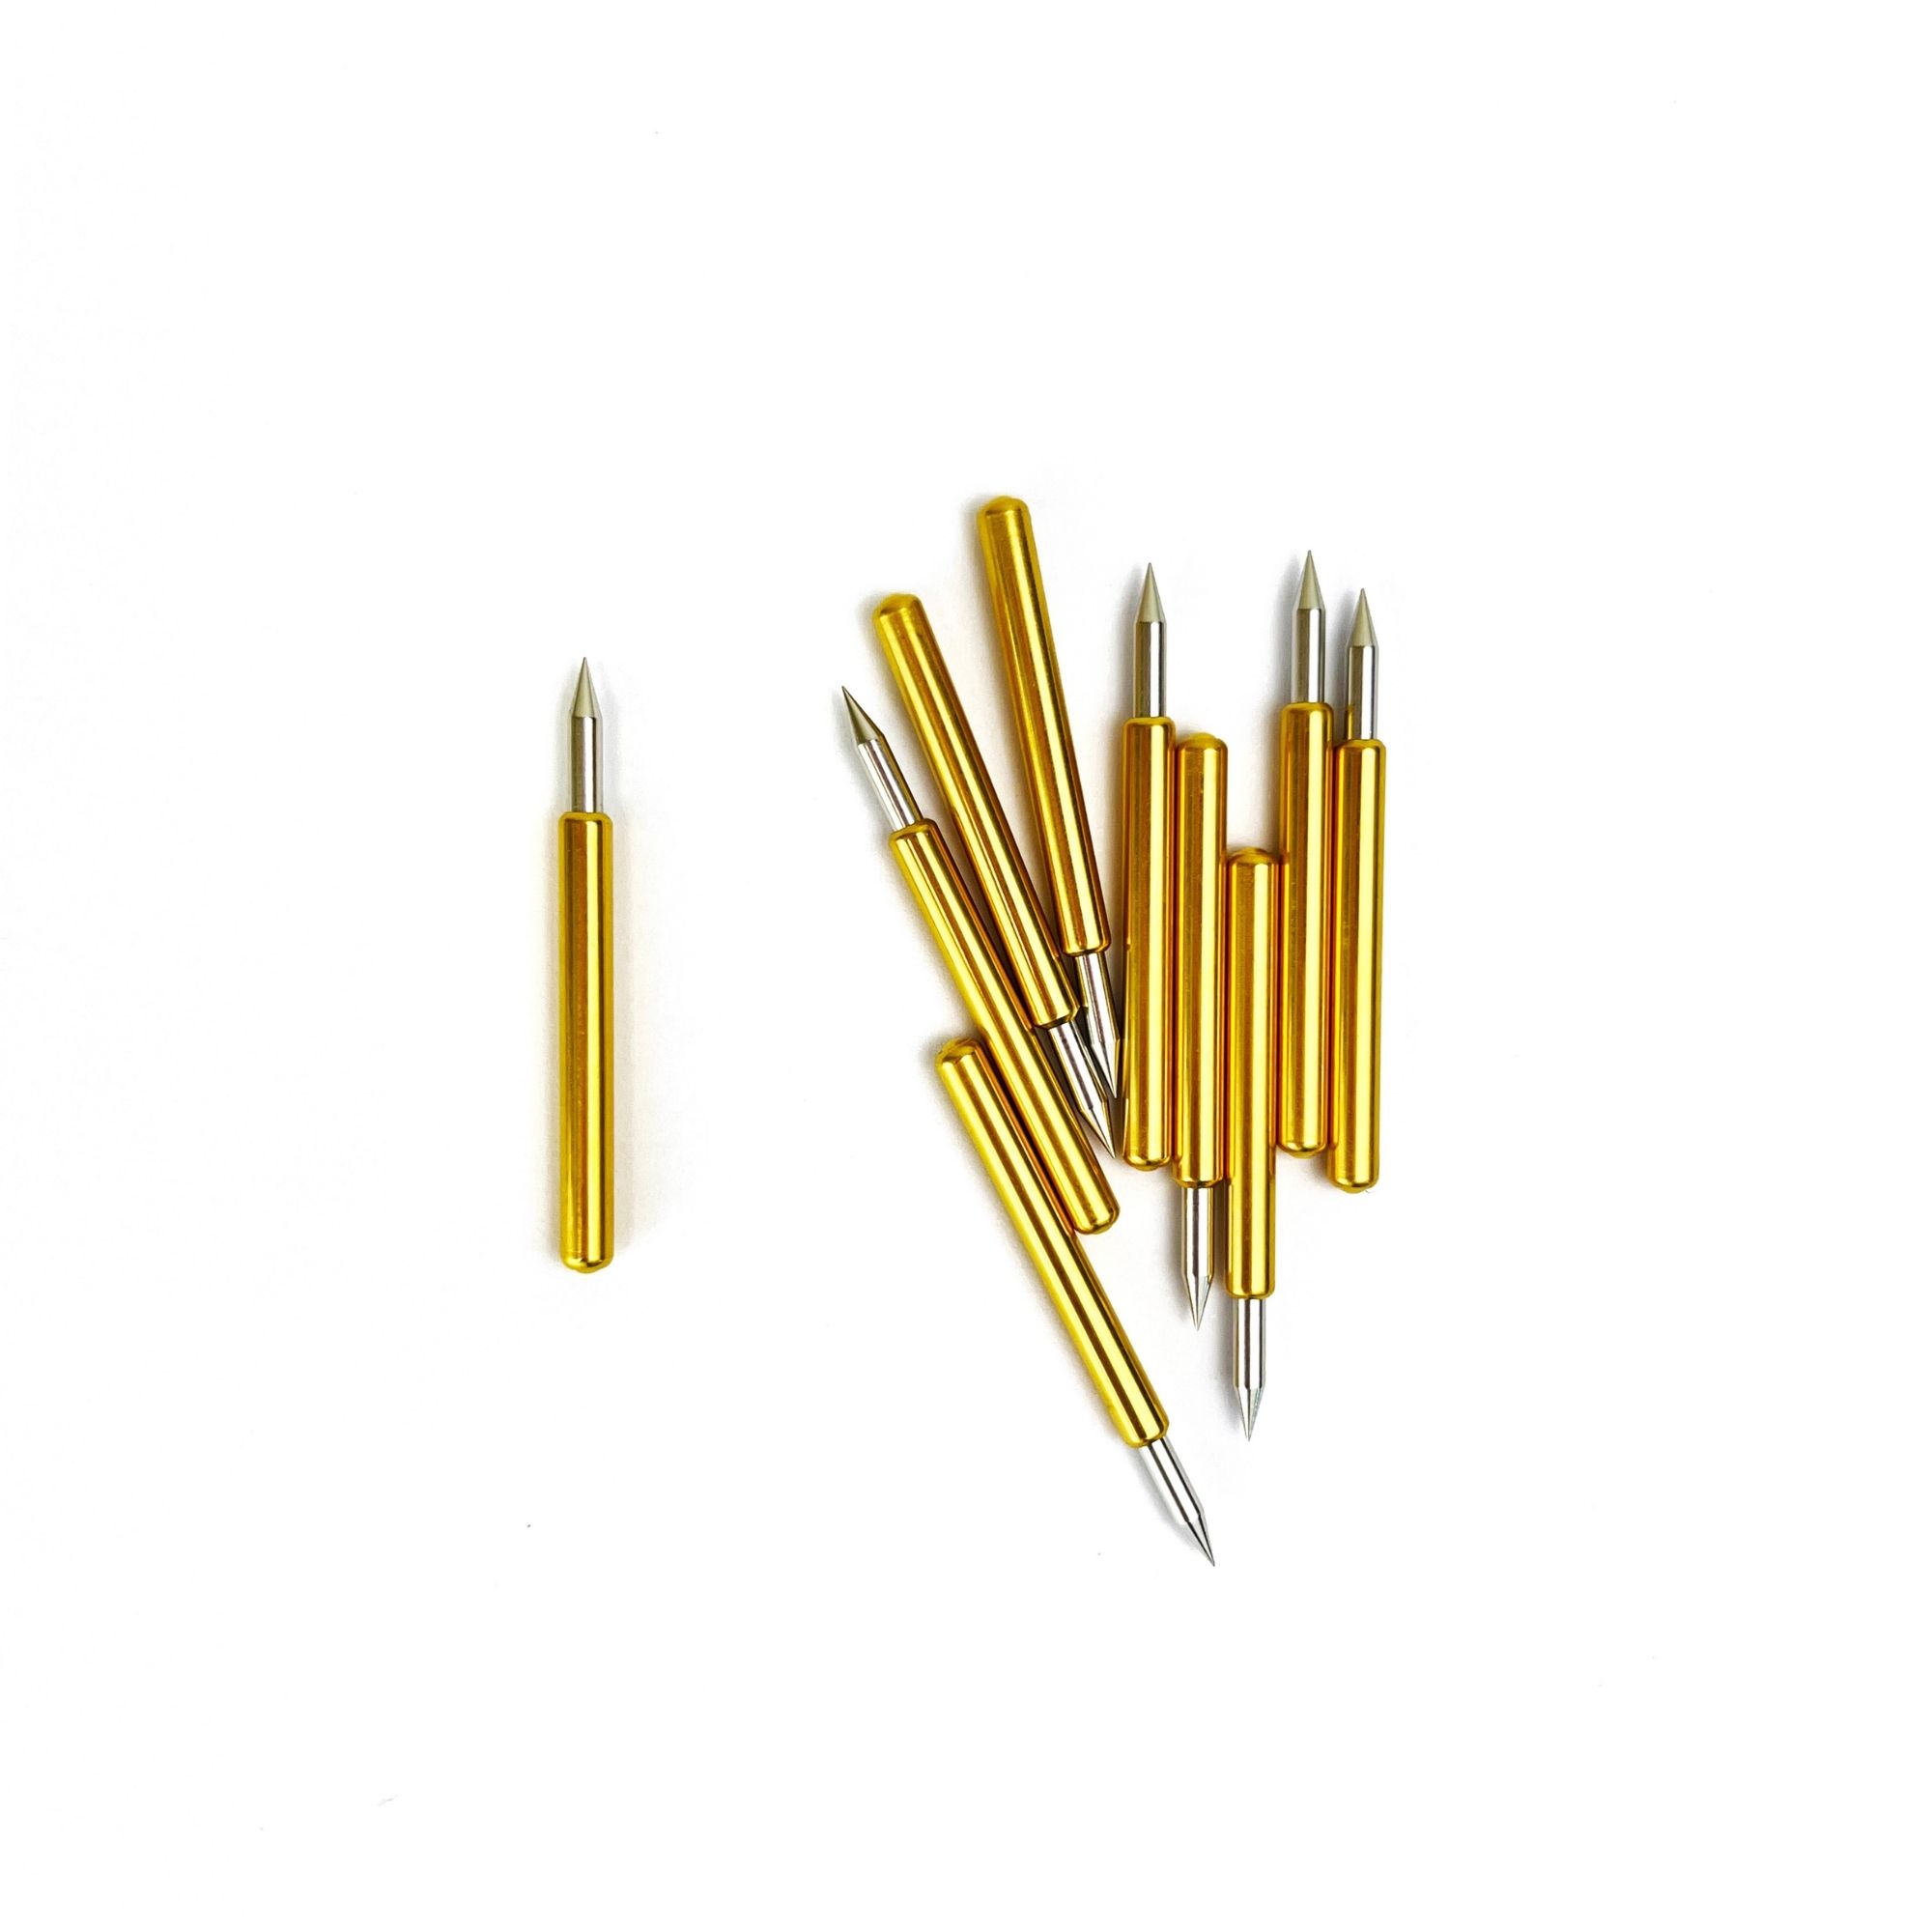 2.10 Accessories - Packshot image placeholderJoint and probe replacement tips